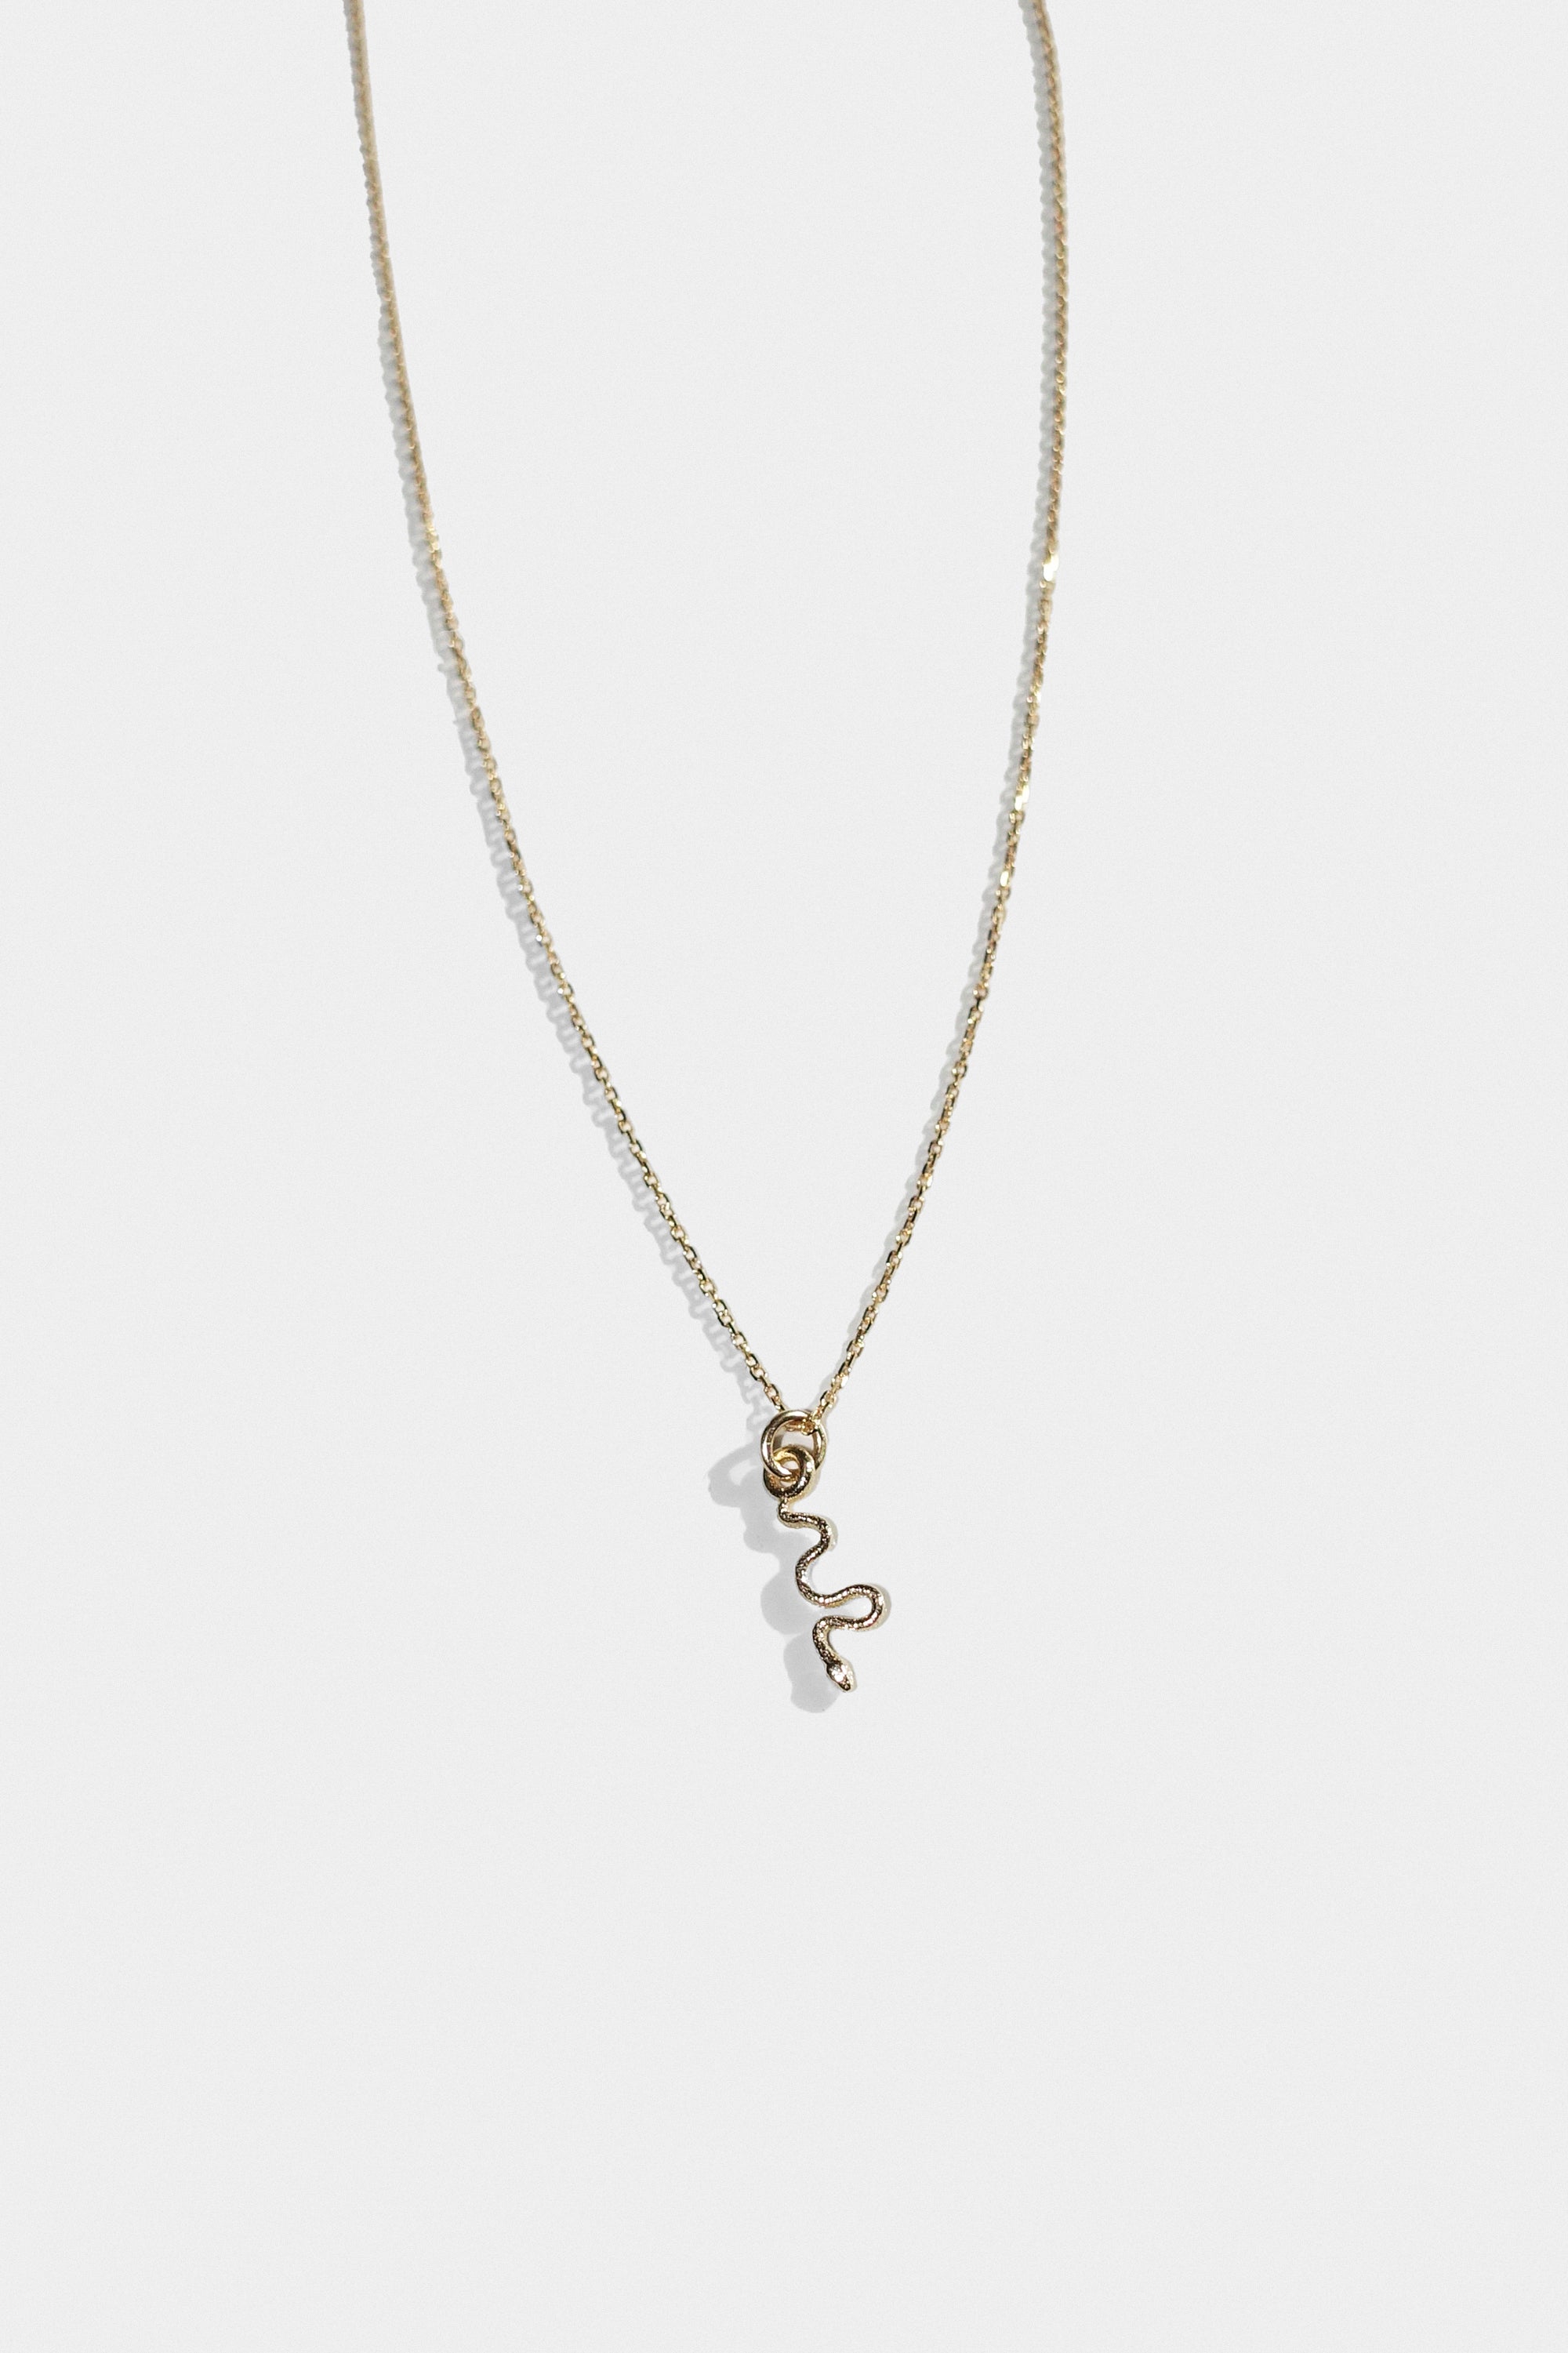 Itty Bitty Snake Pendant Necklace in 14k Gold